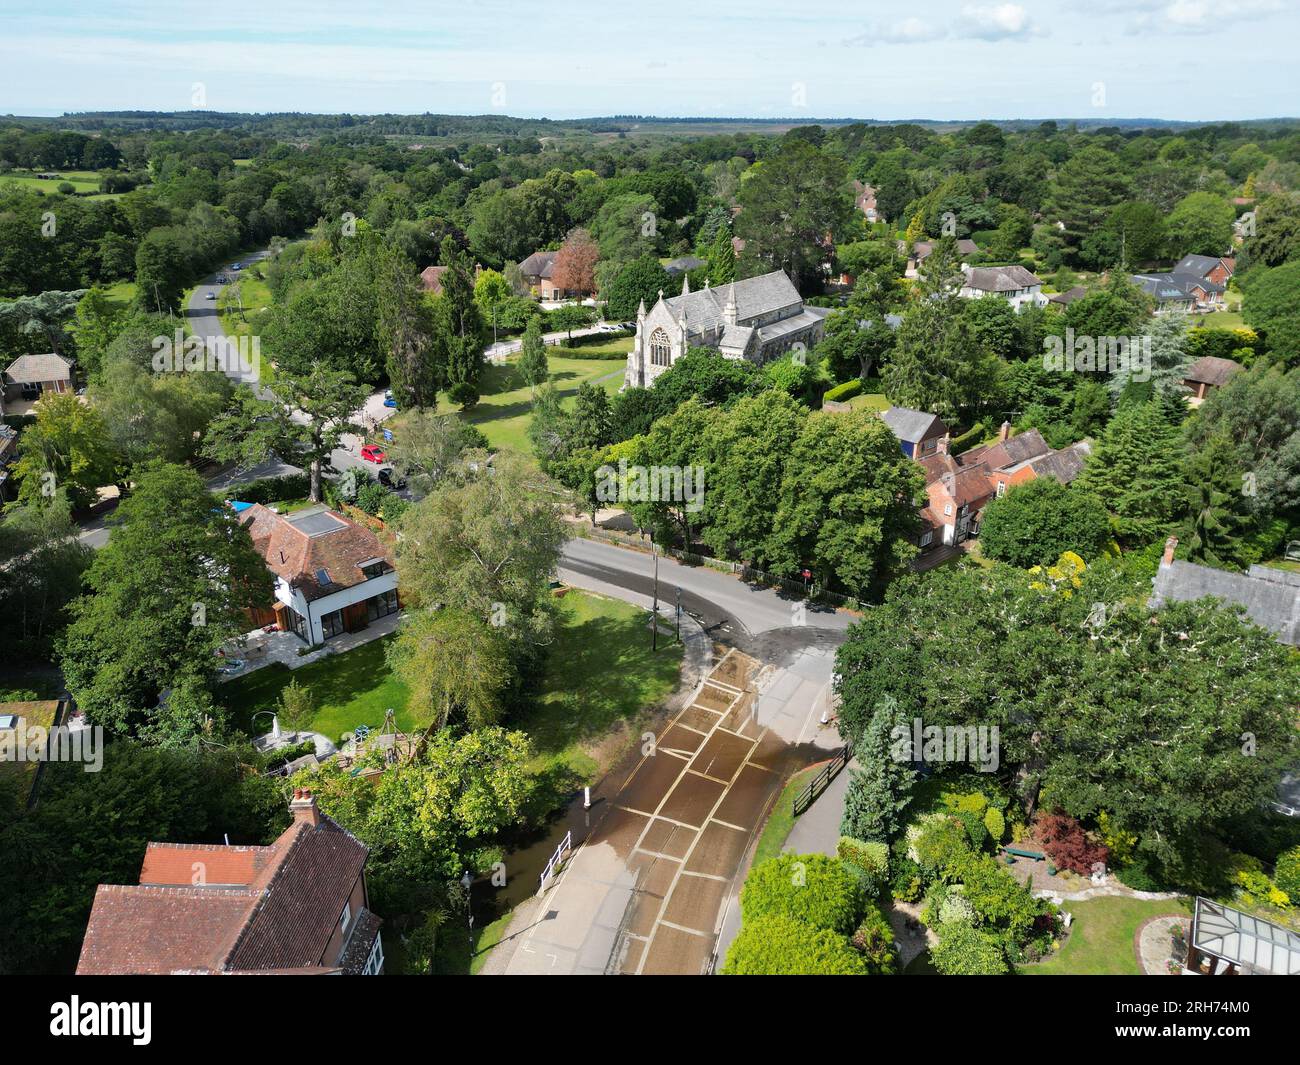 Road ford Brockenhurst Village in New Forest Hampshire UK aerial view Stock Photo